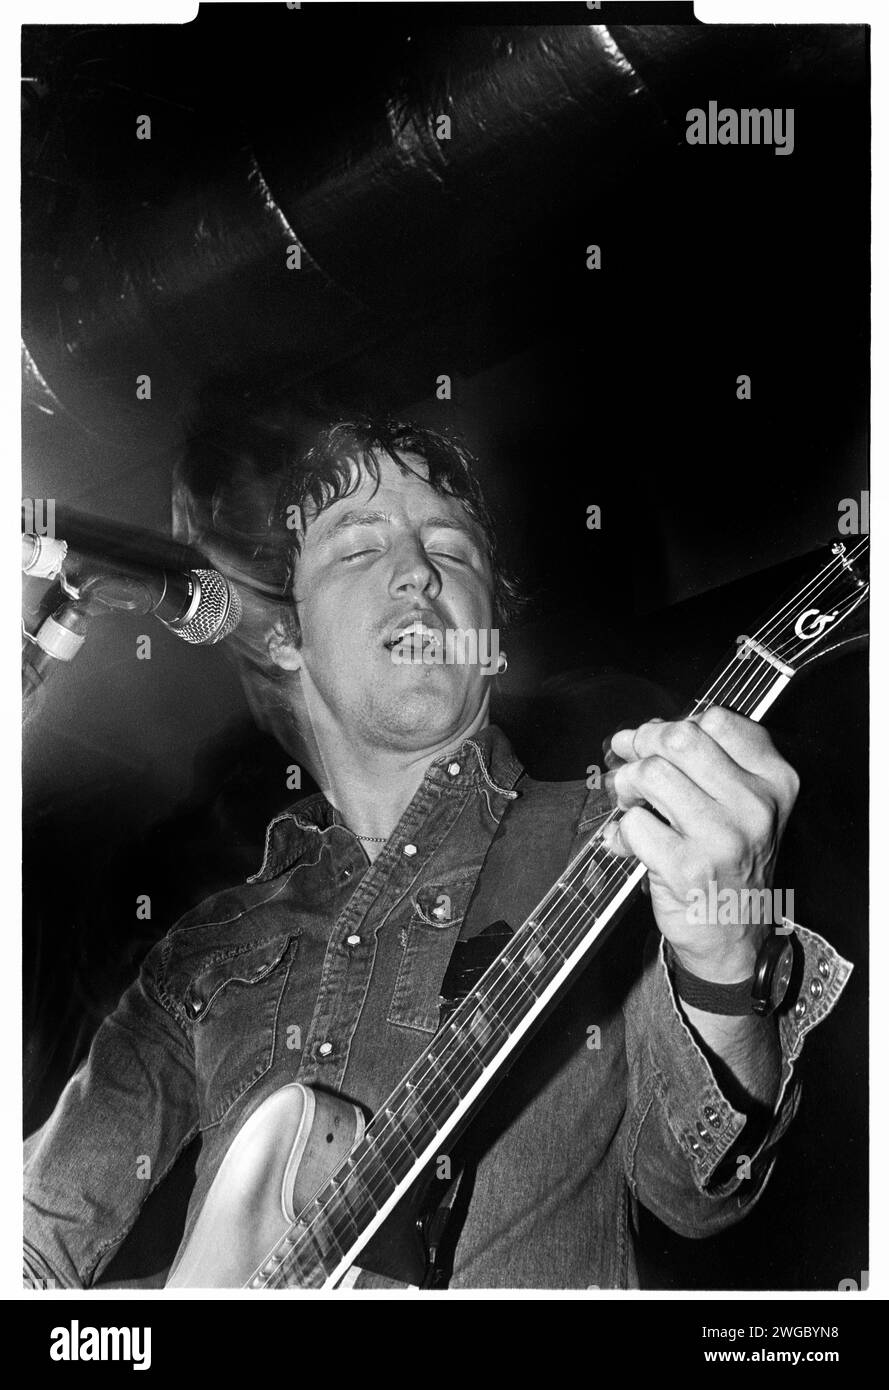 GEM ARCHER, HEAVY STEREO, 1995: A young Gem Archer of the rock band Heavy Stereo playing at Cardiff University Terminal in Cardiff, Wales on 22 October 1995. Photo: Rob Watkins. INFO: Heavy Stereo, a British rock band formed in the '90s, was fronted by Gem Archer. Blending rock and pop influences, their sound showcased a vibrant energy. Despite a brief tenure, their contribution to the Britpop era was significant. Stock Photo